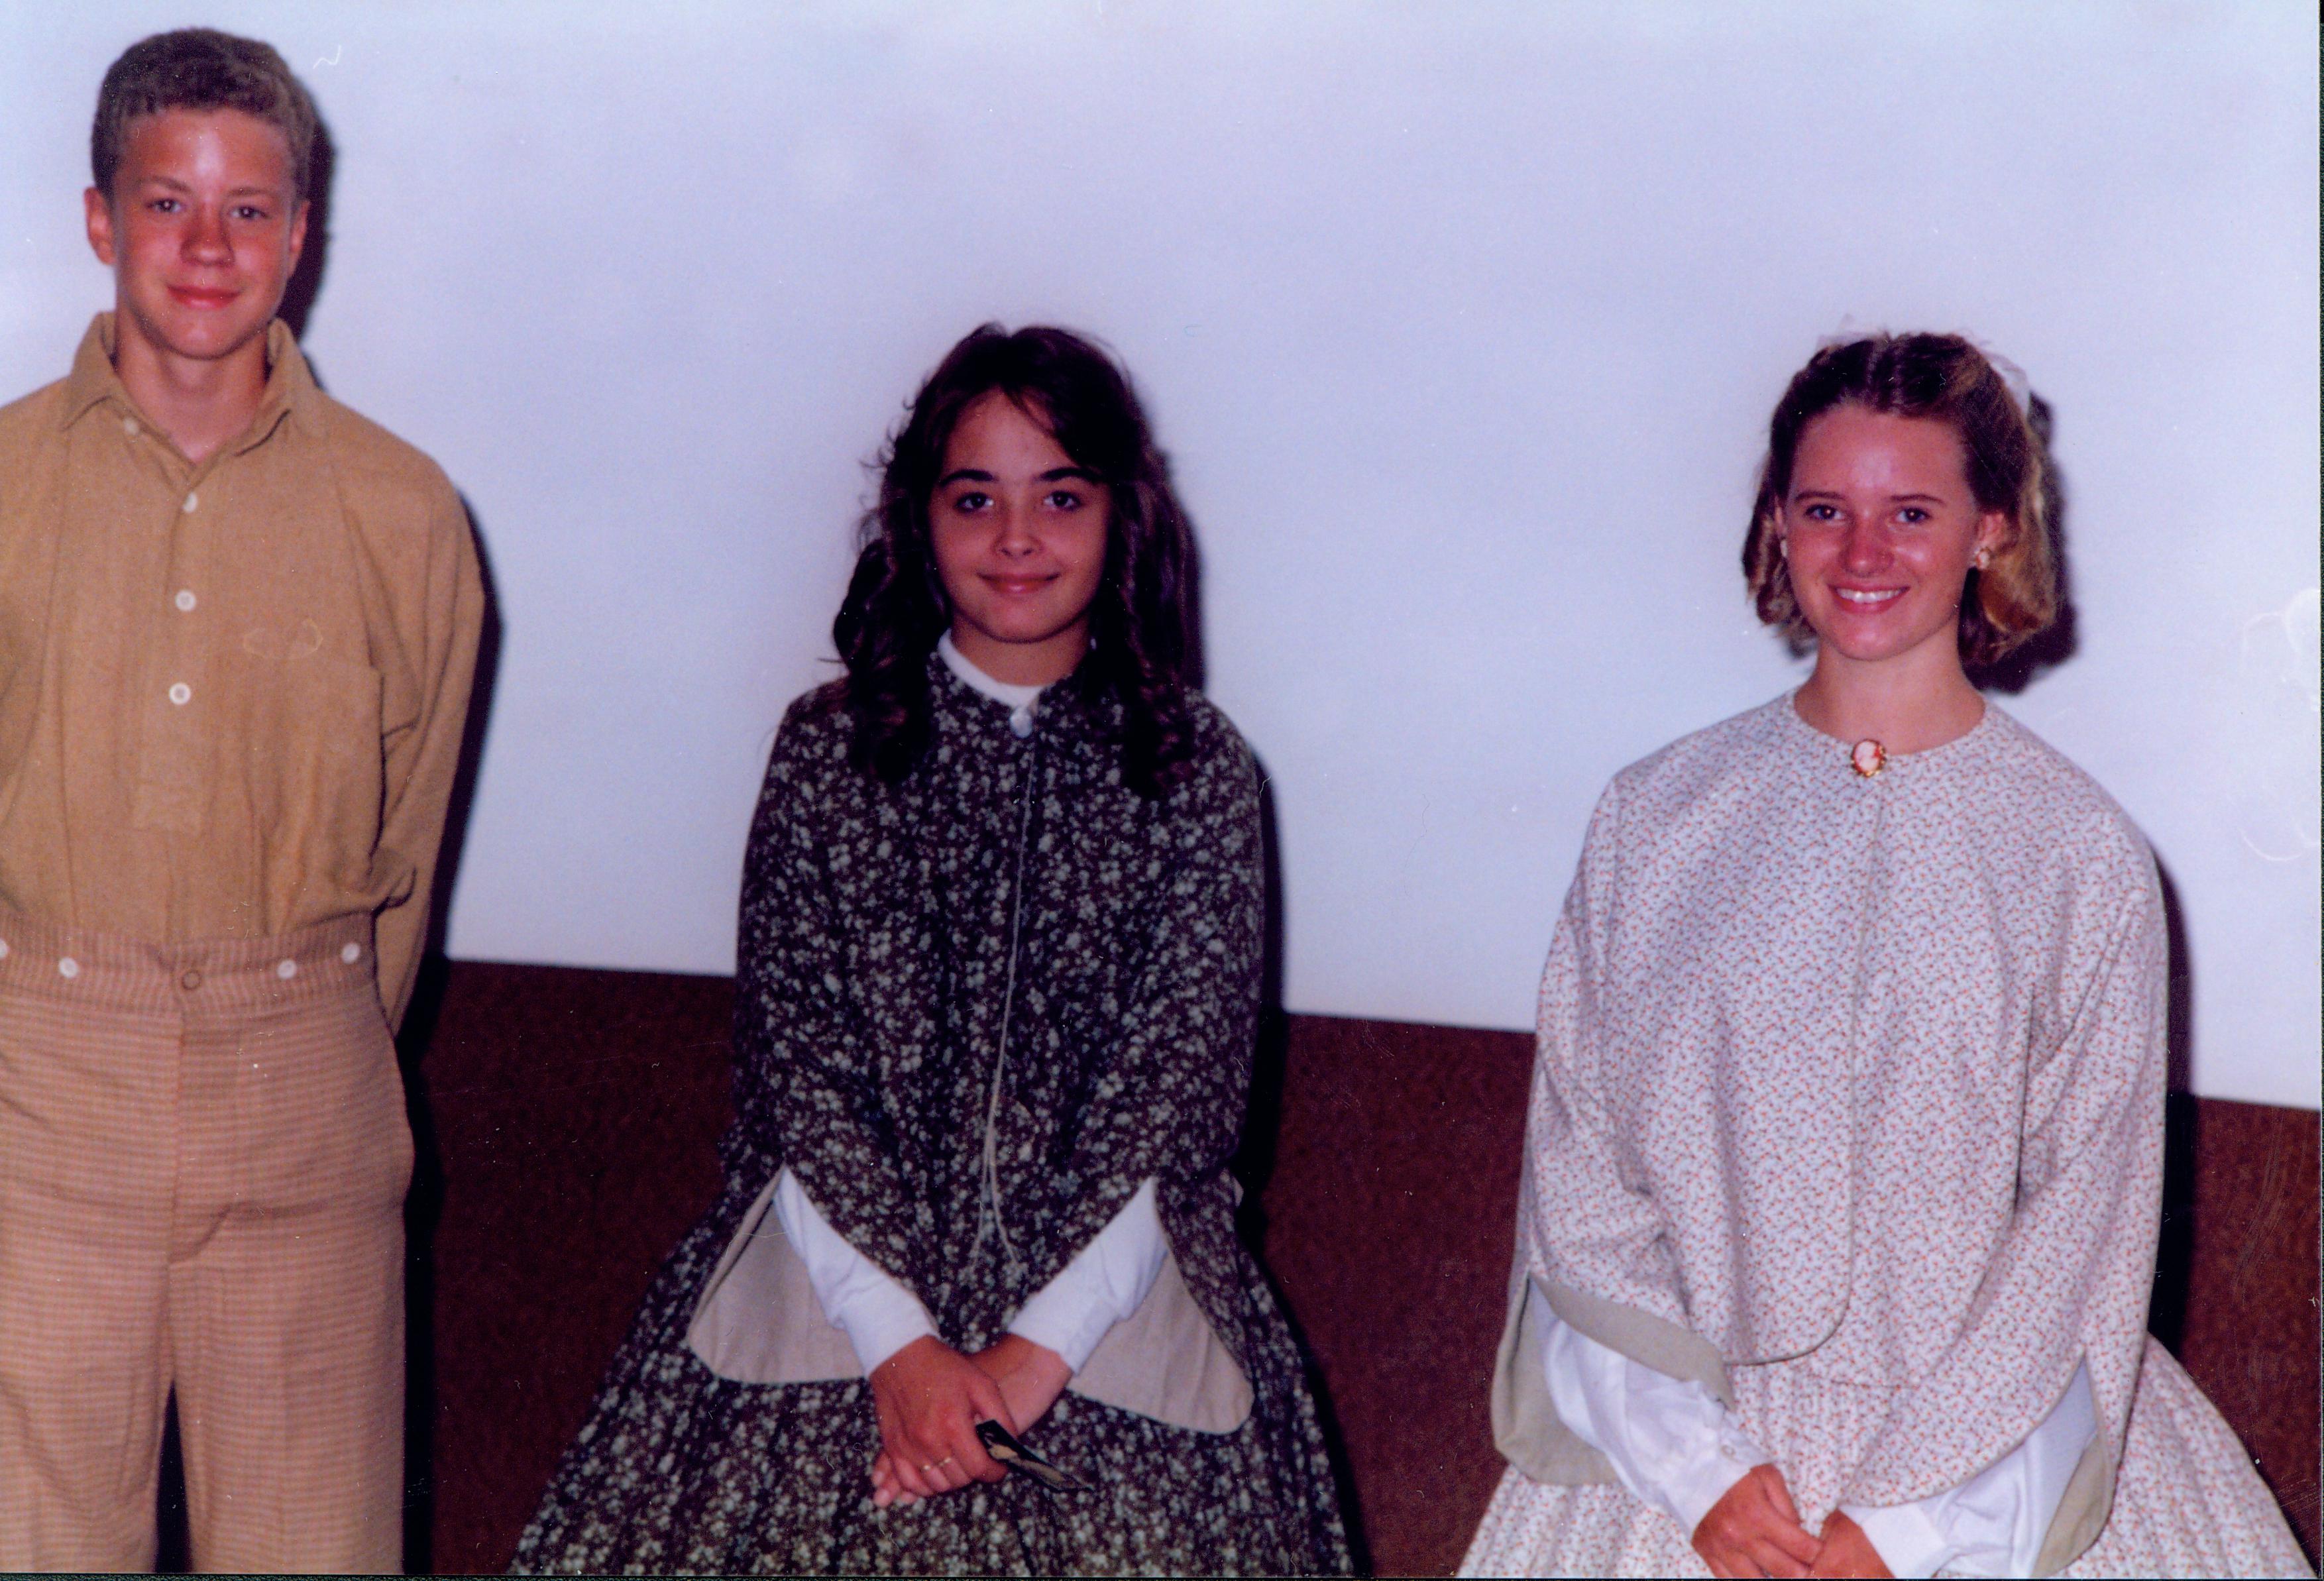 Greg Forbes, Jennie McLain, Rebecca M. Dale - June 1989.  MTL slideshow with Eggleston 35A Students, Mary Tood Lincoln, Show